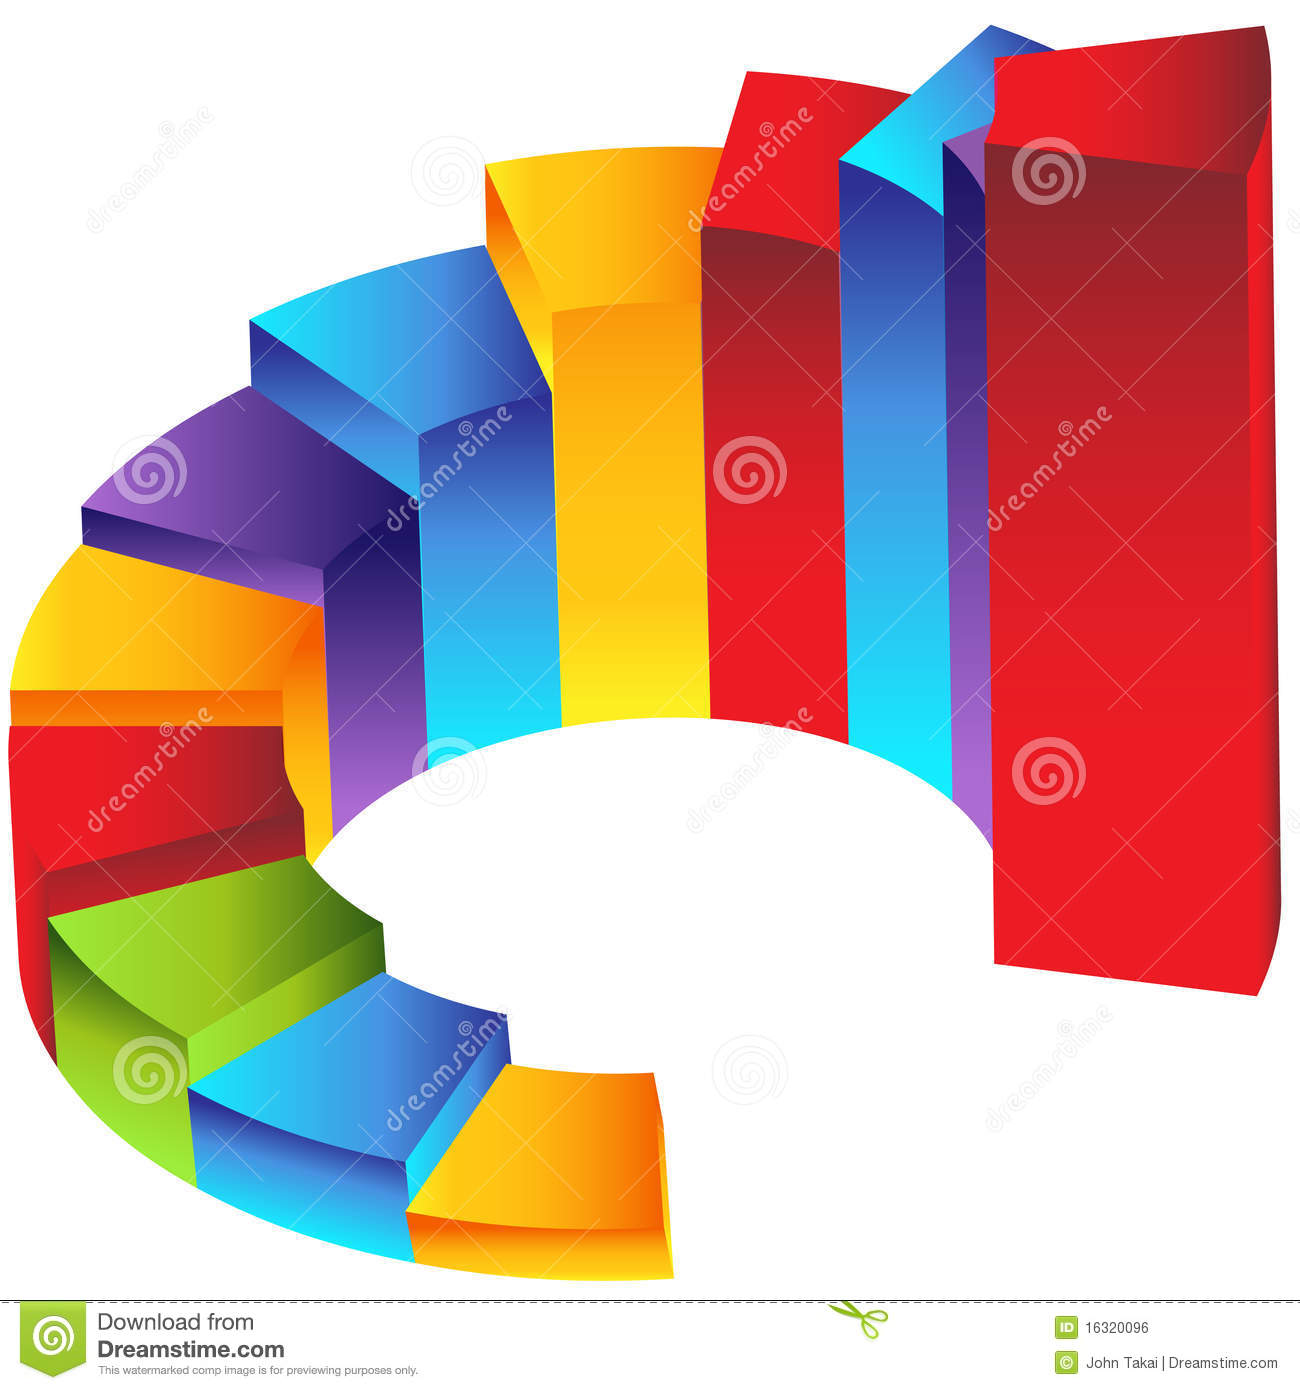 Staircase Step Column Chart Royalty Free Stock Image   Image  16320096